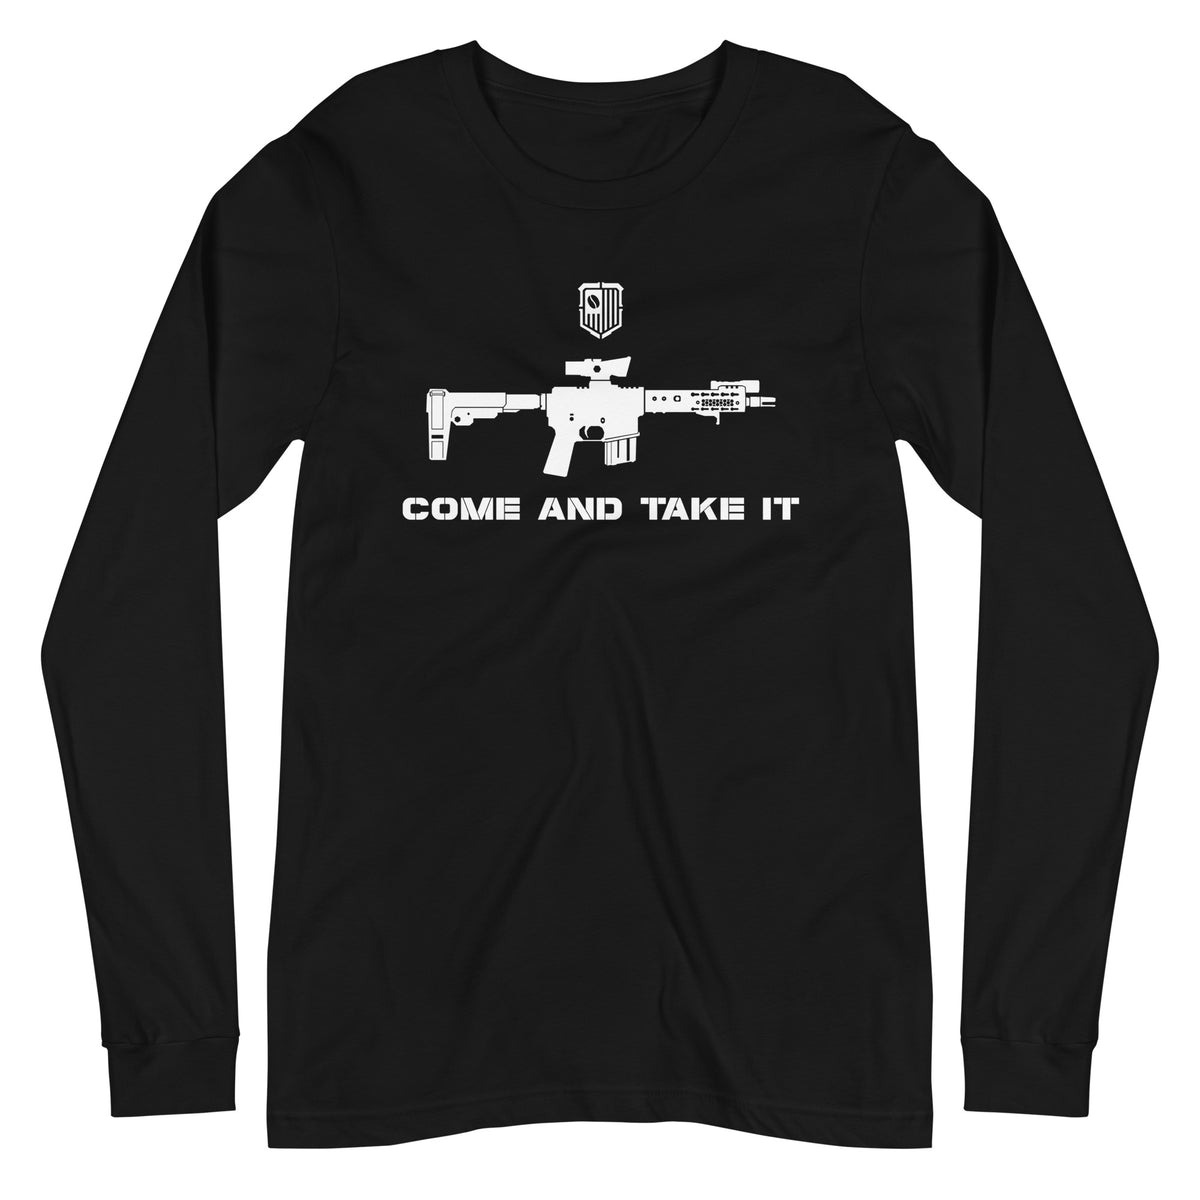 COME AND TAKE IT LONG SLEEVE TEE